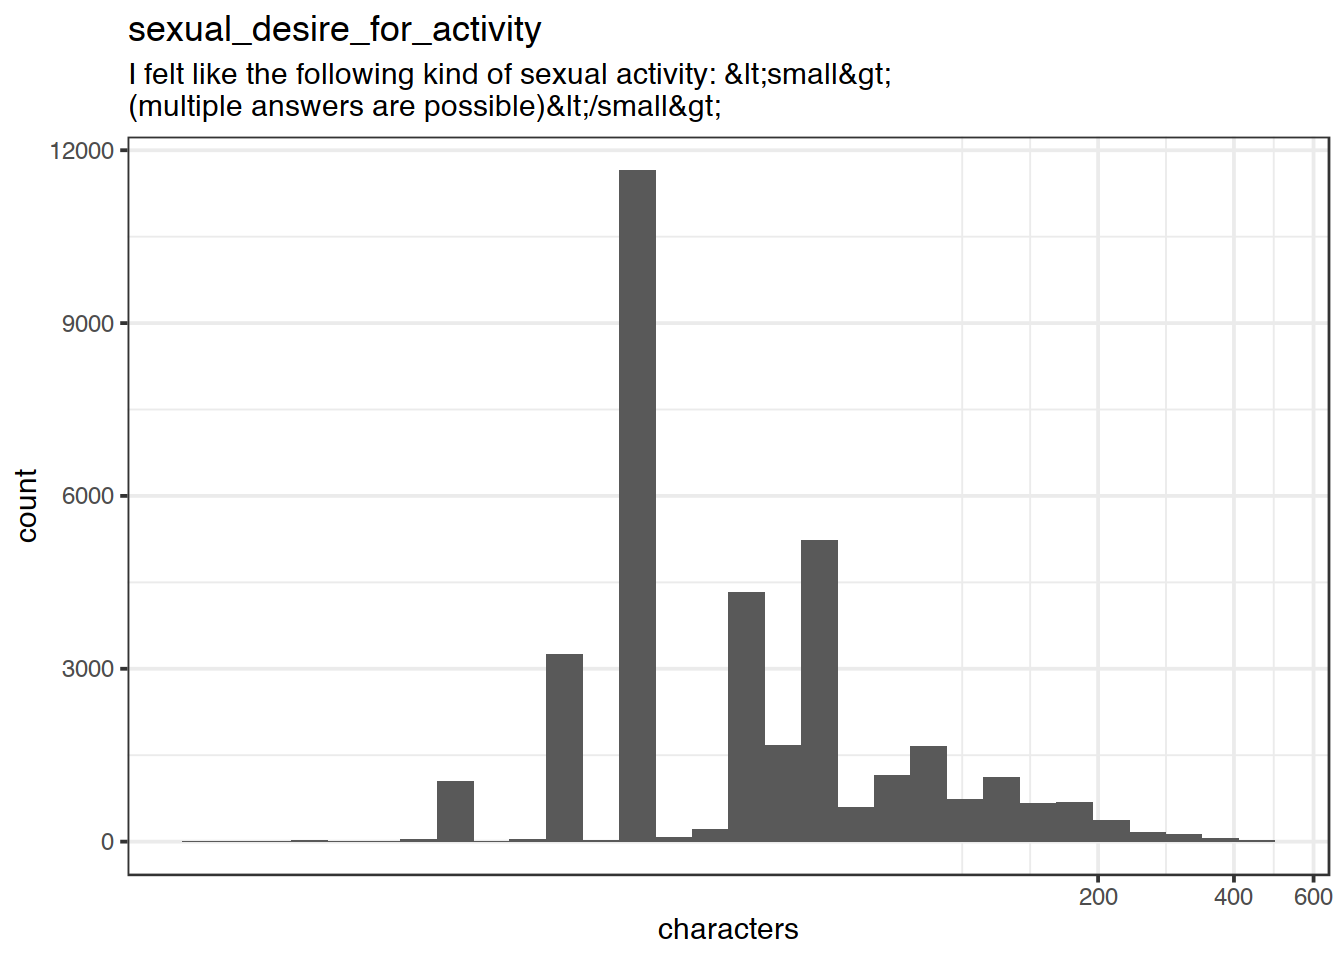 Distribution of values for sexual_desire_for_activity